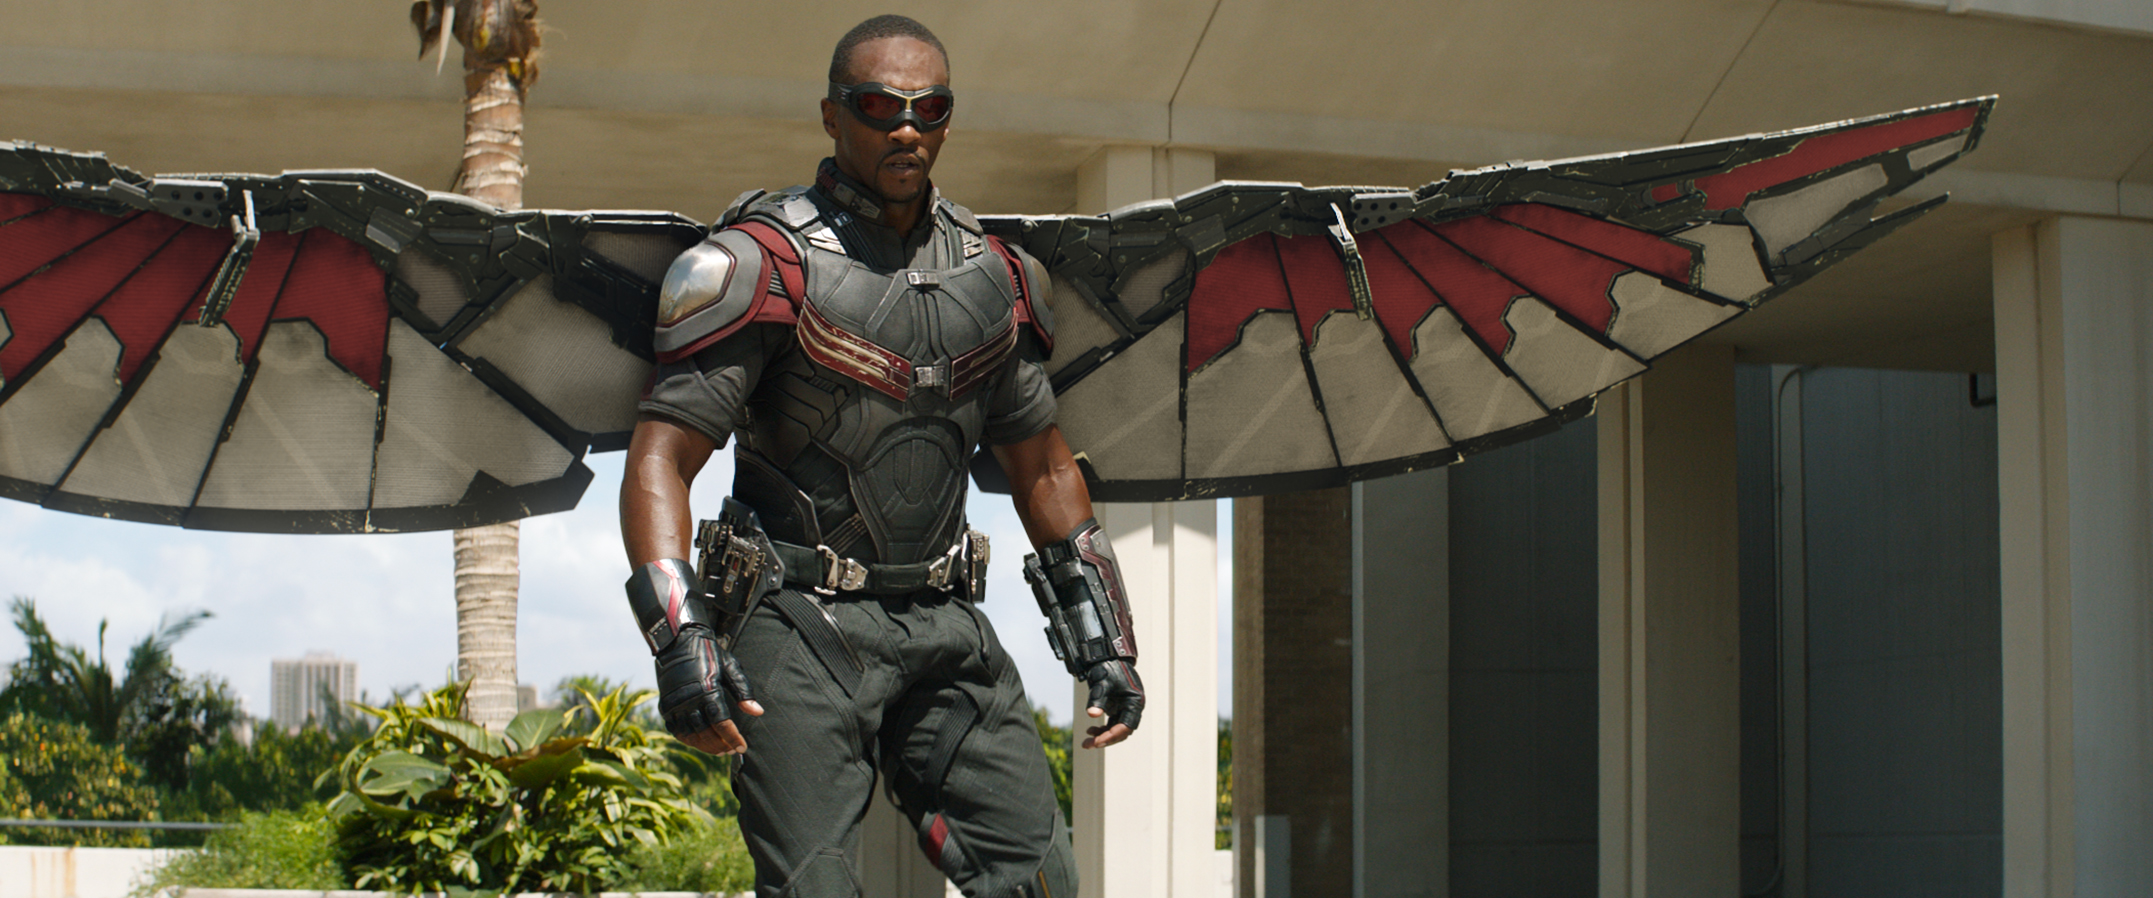 Anthony Mackie as Falcon in Captain America: Civil War